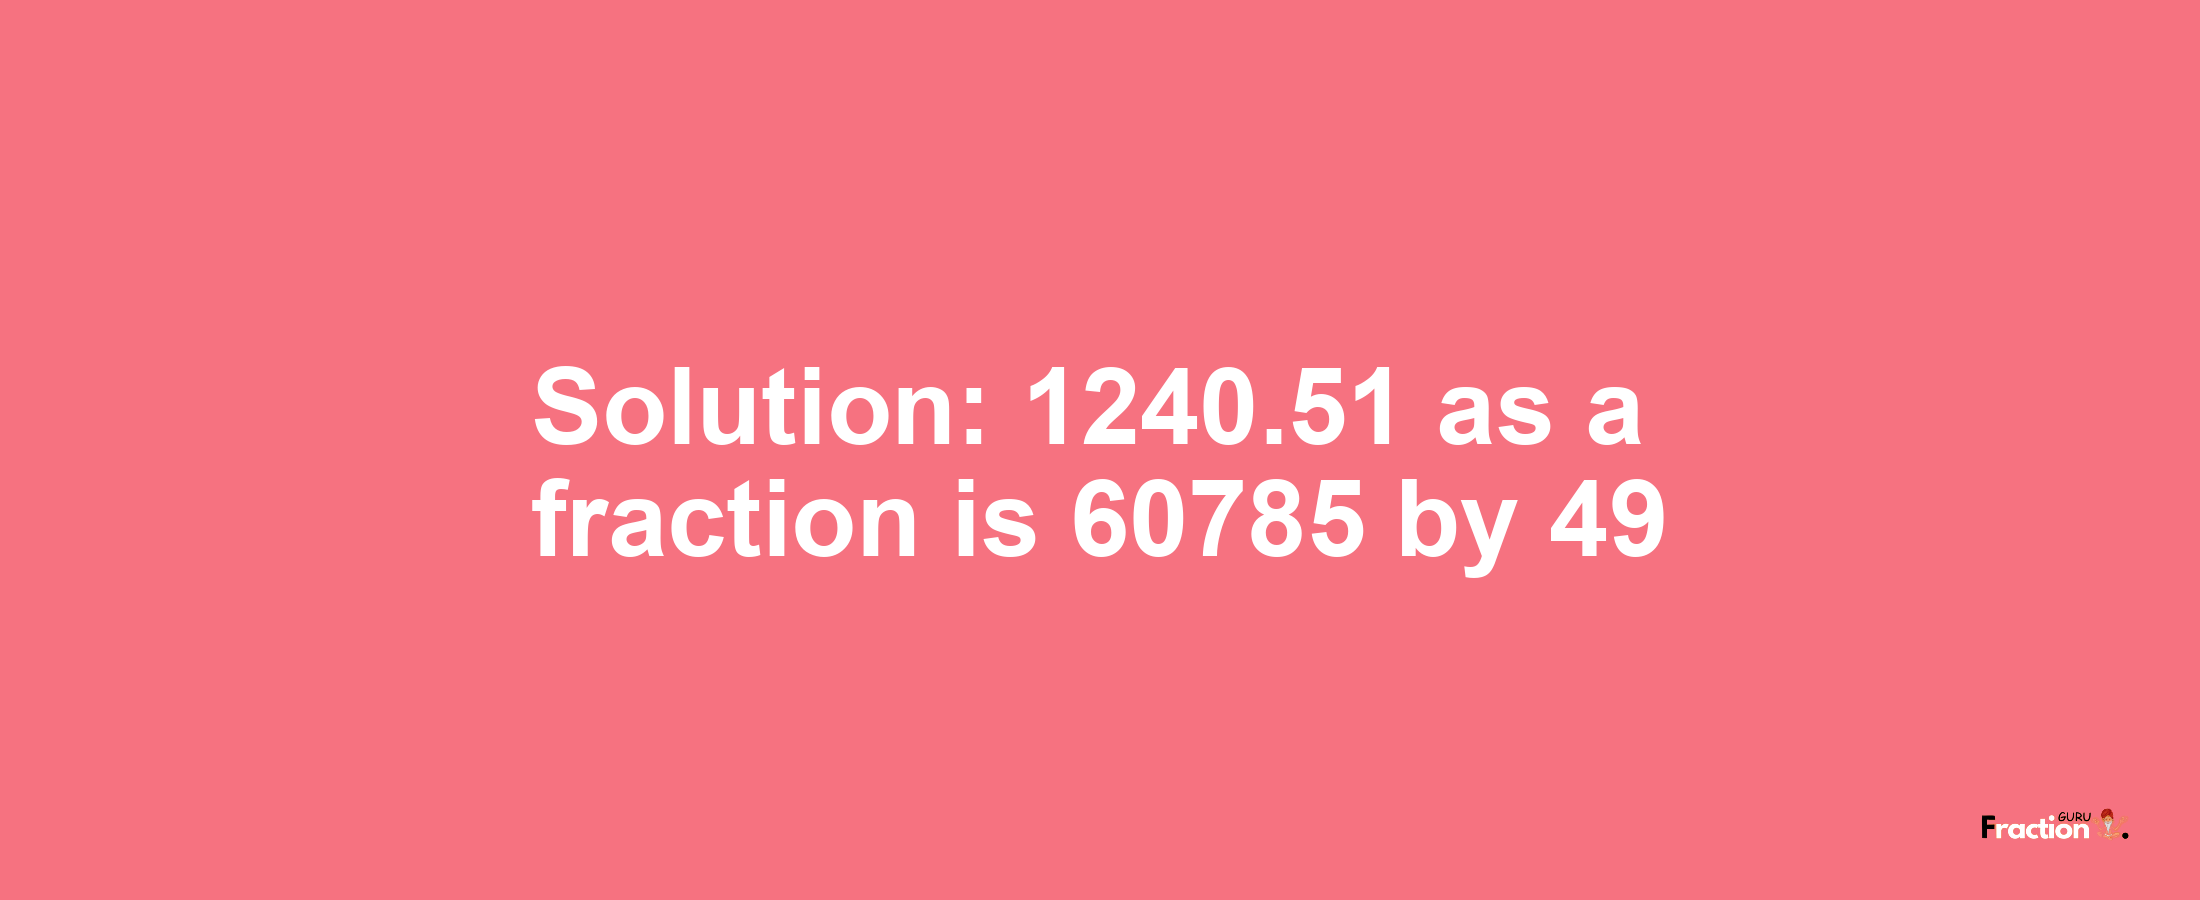 Solution:1240.51 as a fraction is 60785/49